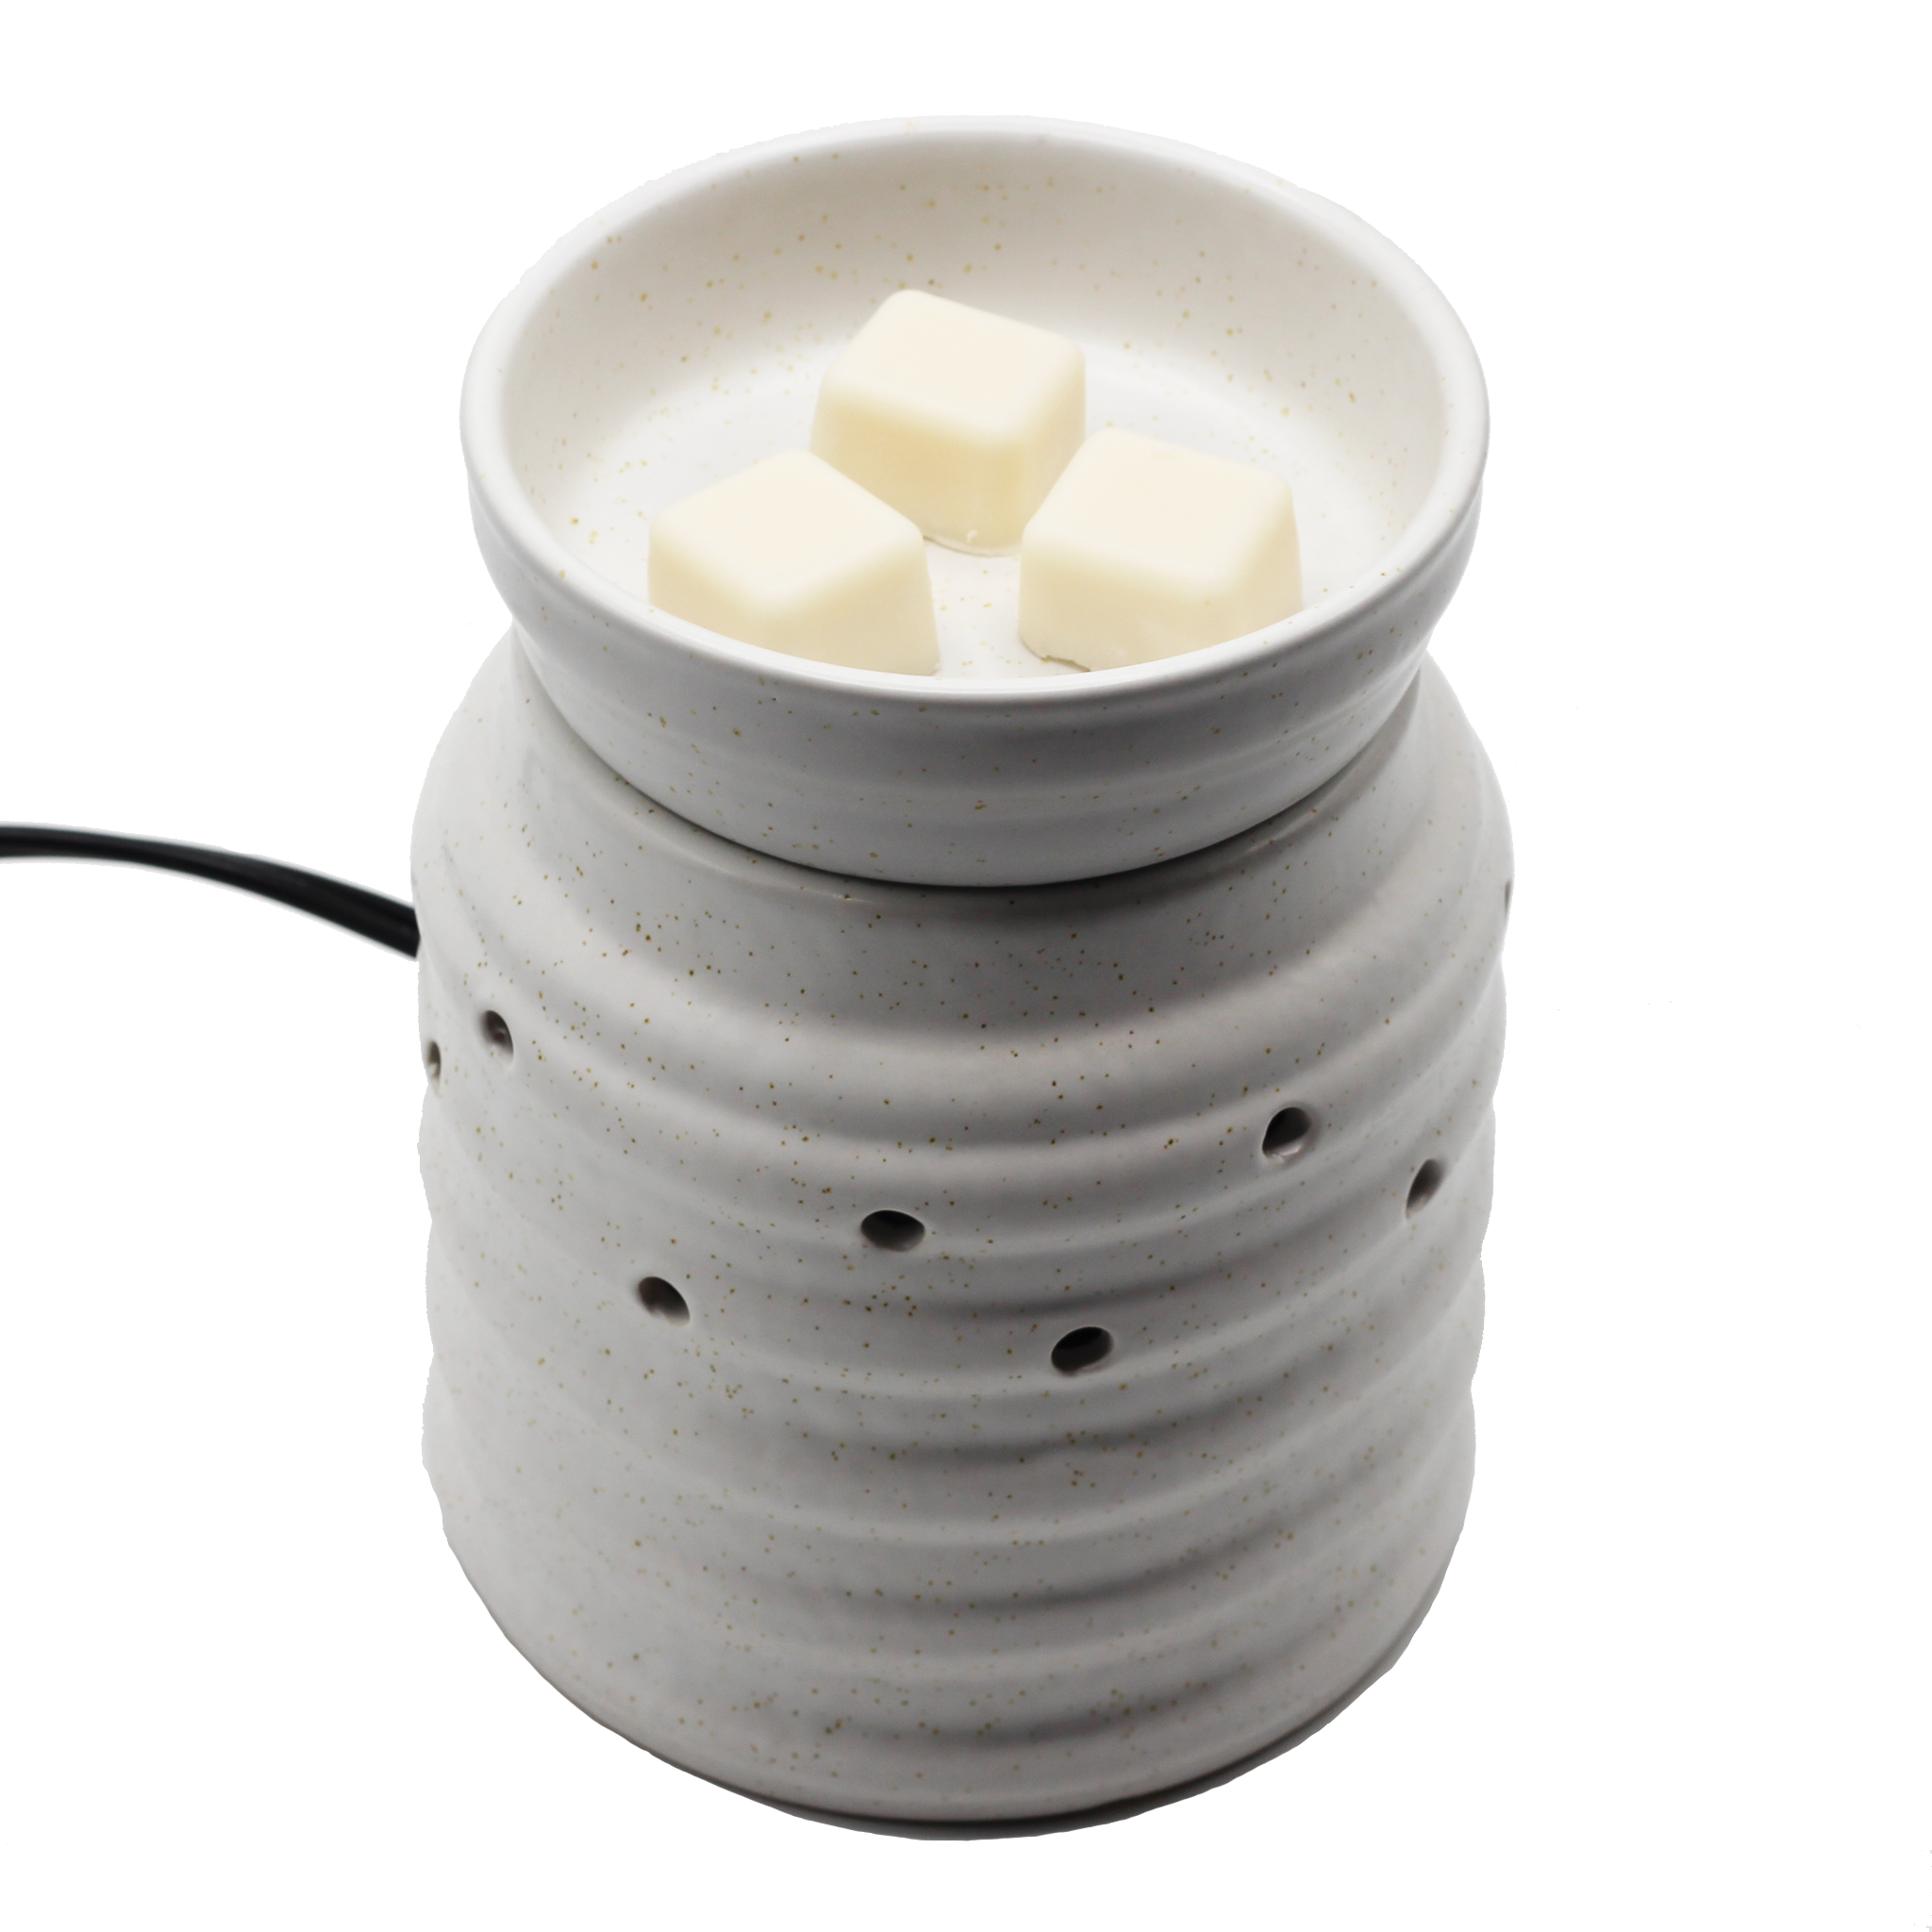 Easy Clean Up Electric Wax Warmer – Mountainside Woodwick Candles